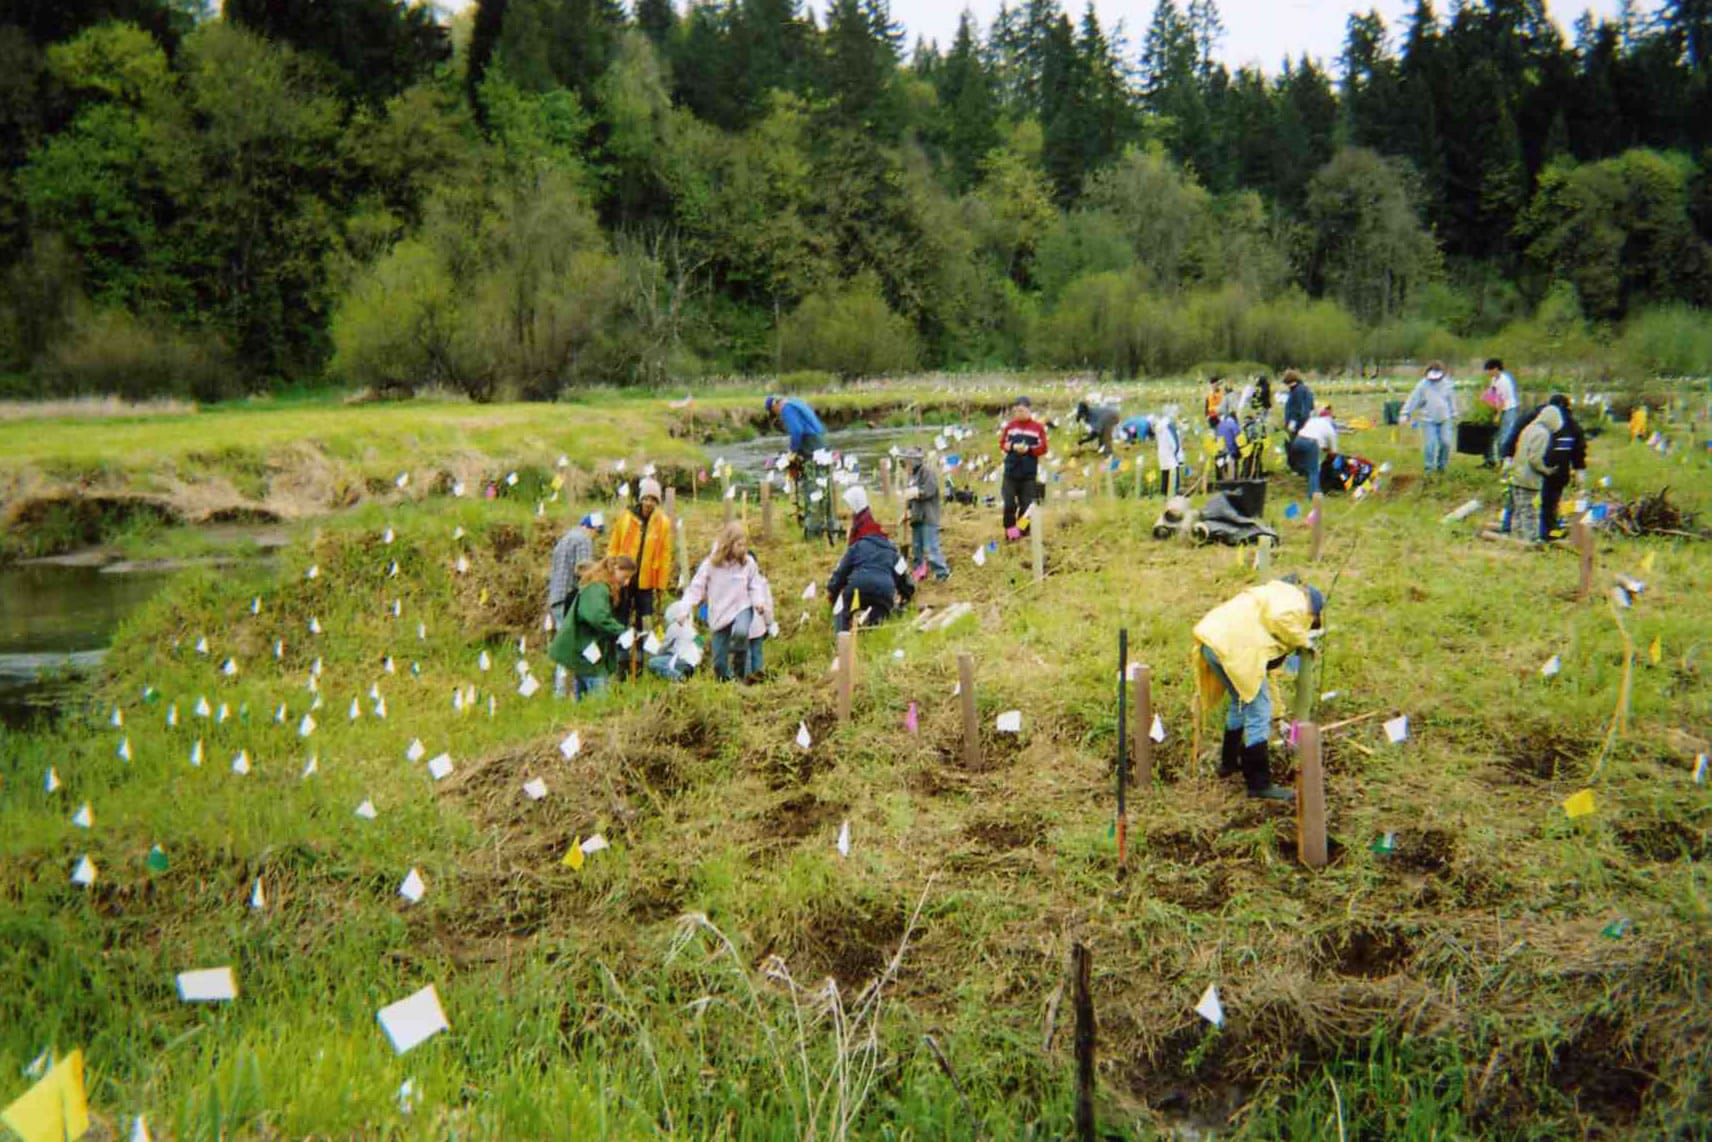 Students from the People To People student ambassador program help plant trees along the Salmon Creek Greenway for Earth Day in April 2007. Planting this year with Clark Public Utilities’ StreamTeam as part of its 18th Annual Earth Day Fest will be from 8:30 a.m. to 12:30 p.m. Saturday near Klineline Pond.